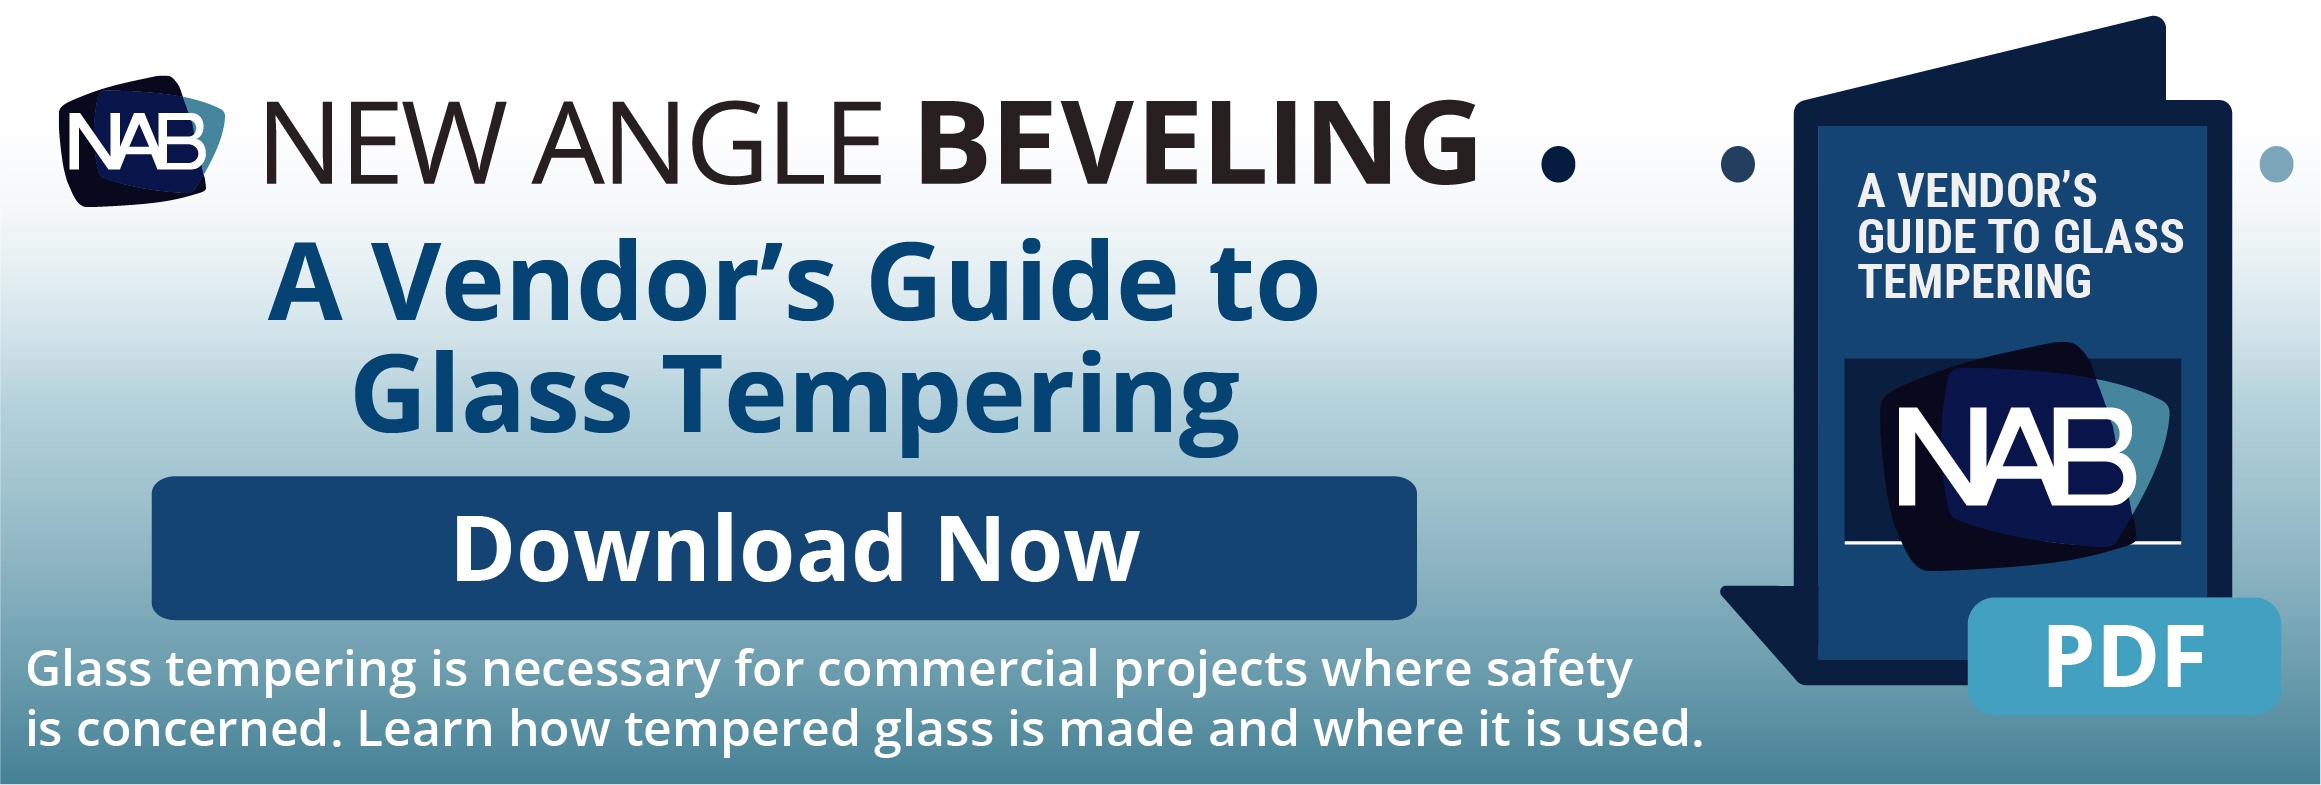 What is Tempered Glass? Uses, Benefits, Disadvantages and Alternatives